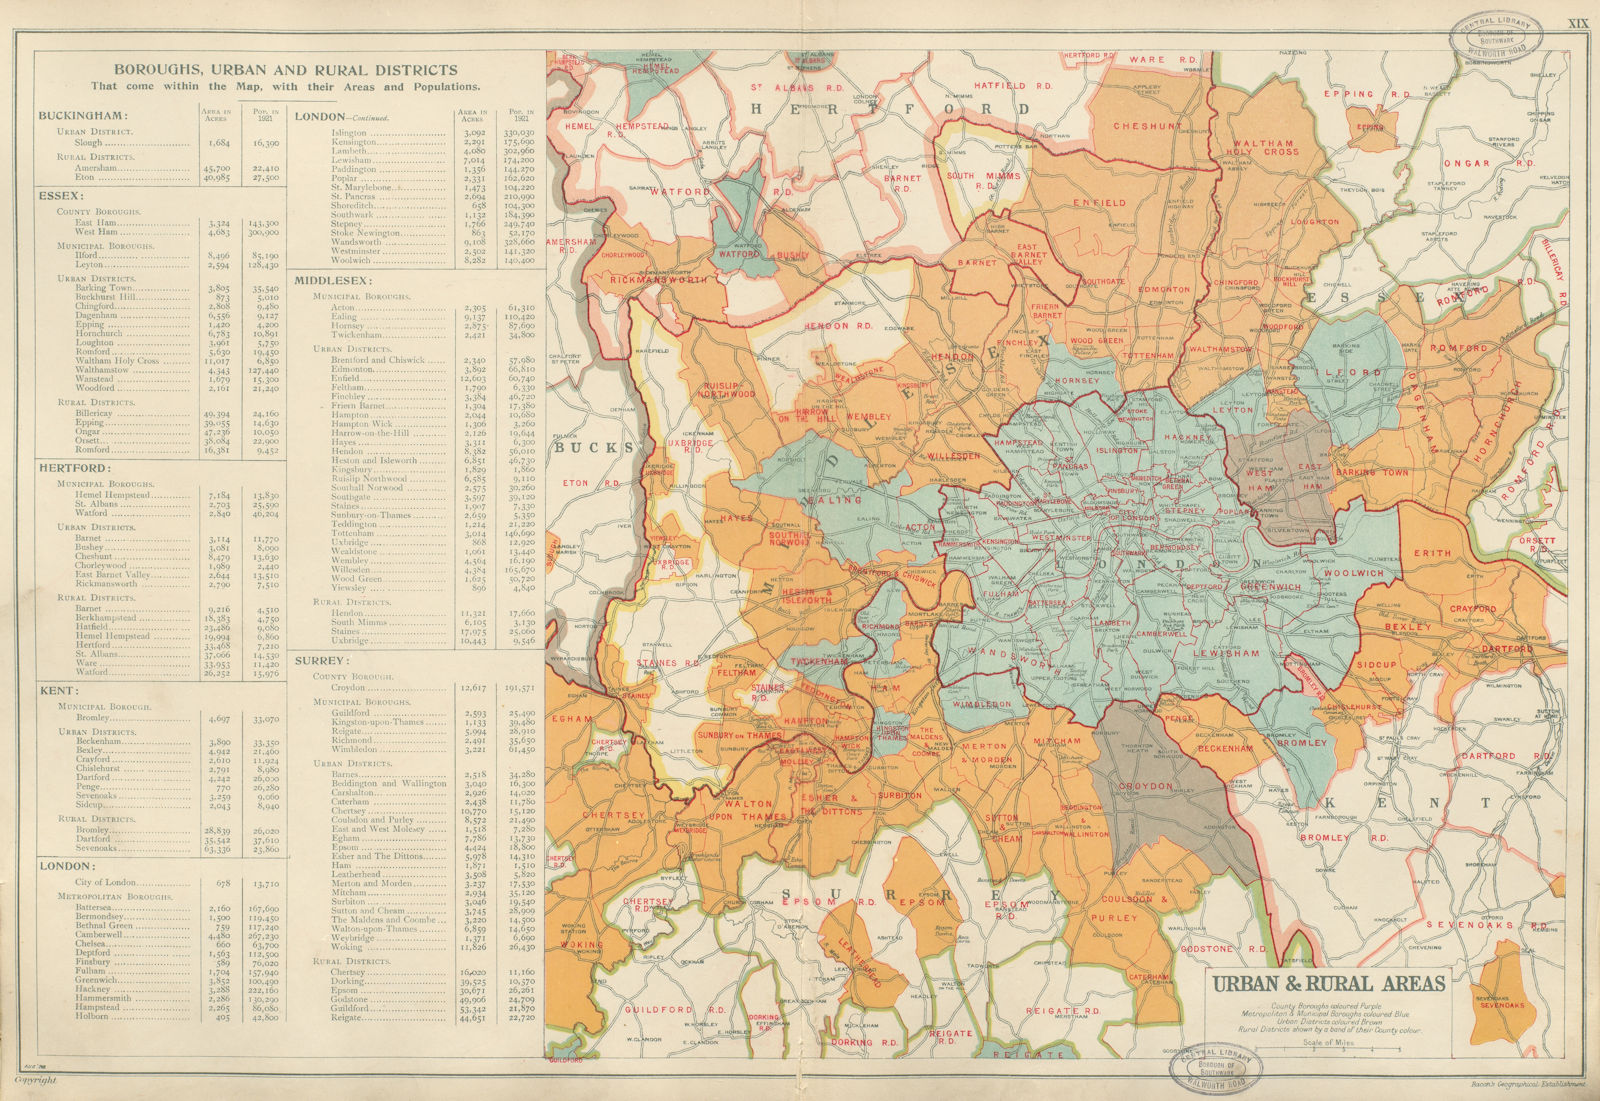 LONDON. Municipal Boroughs, Urban Districts & Rural areas. BACON 1934 old map